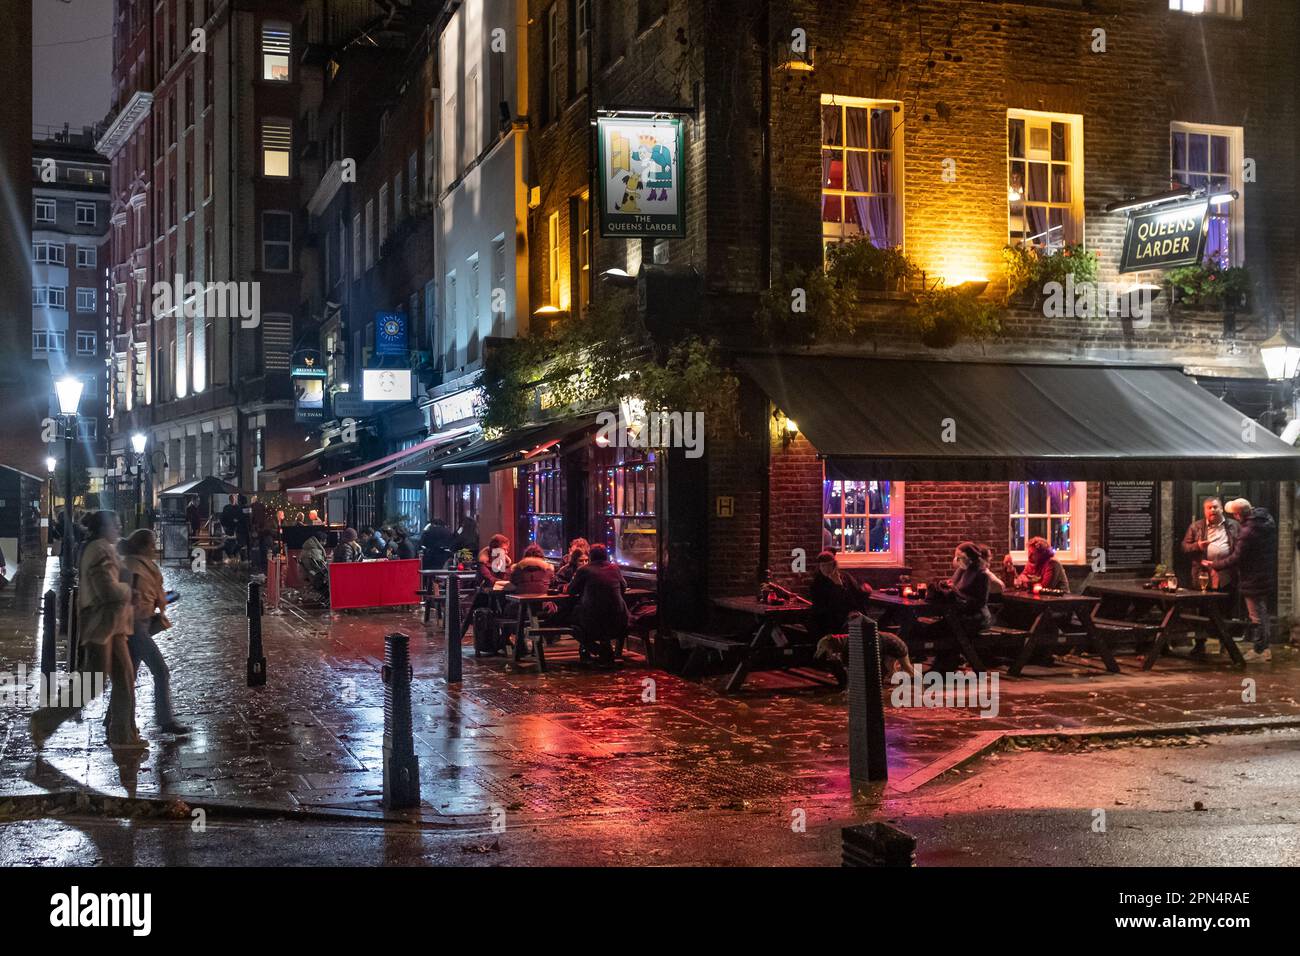 The Queen's Larder at night, Queen Square, Bloomsbury, London, UK Stock Photo